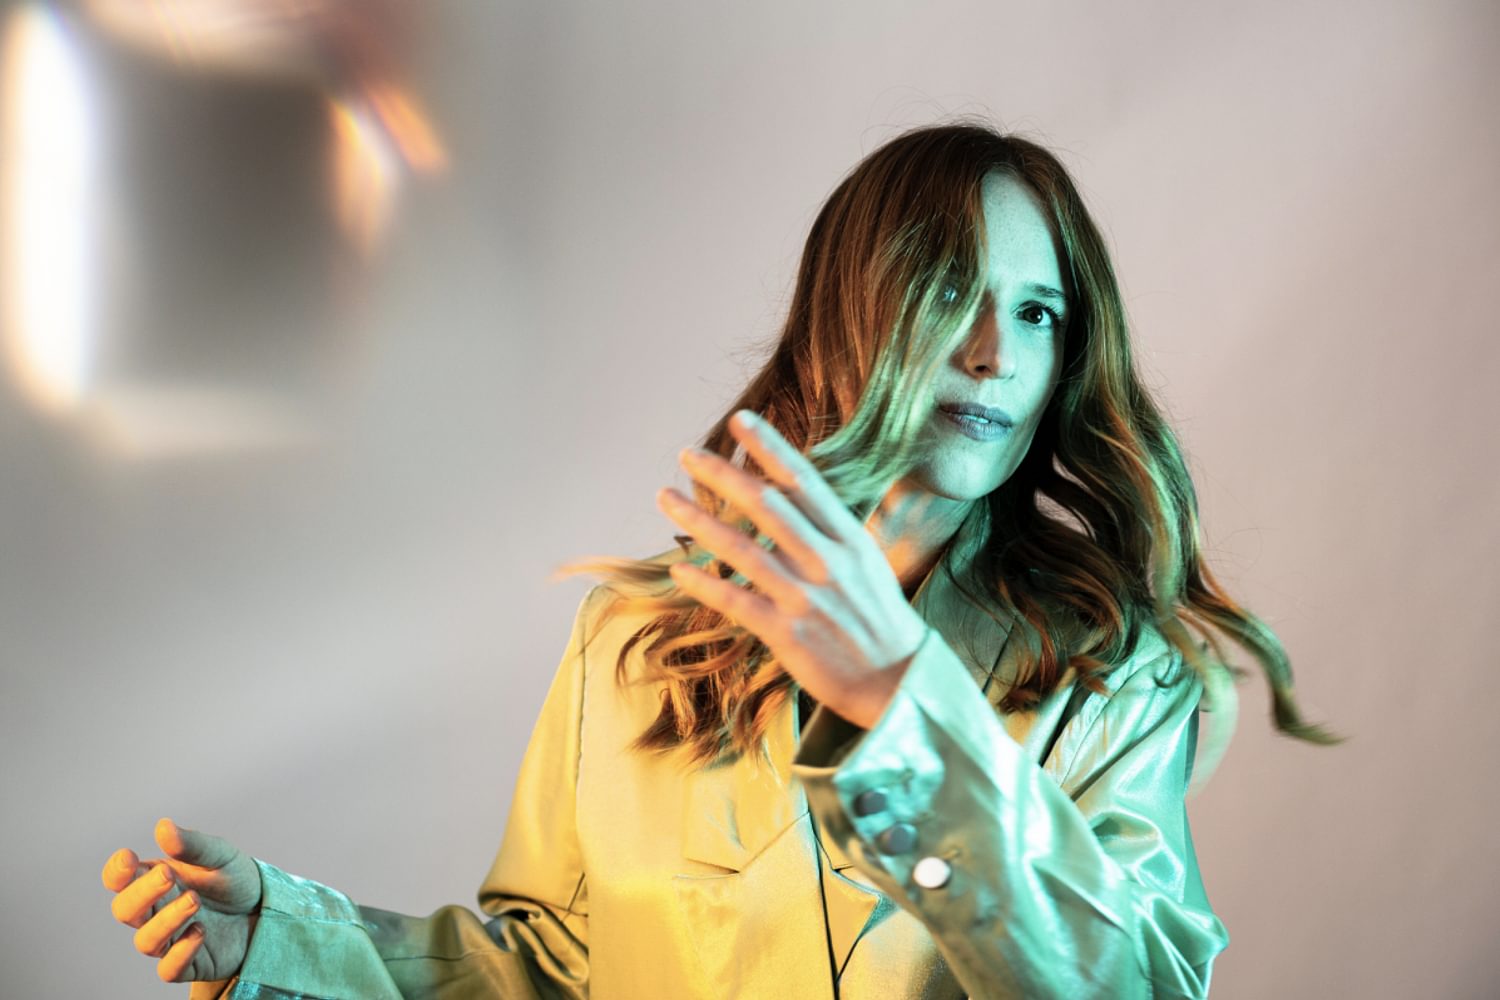 Metronomy’s Anna Prior releases debut solo single